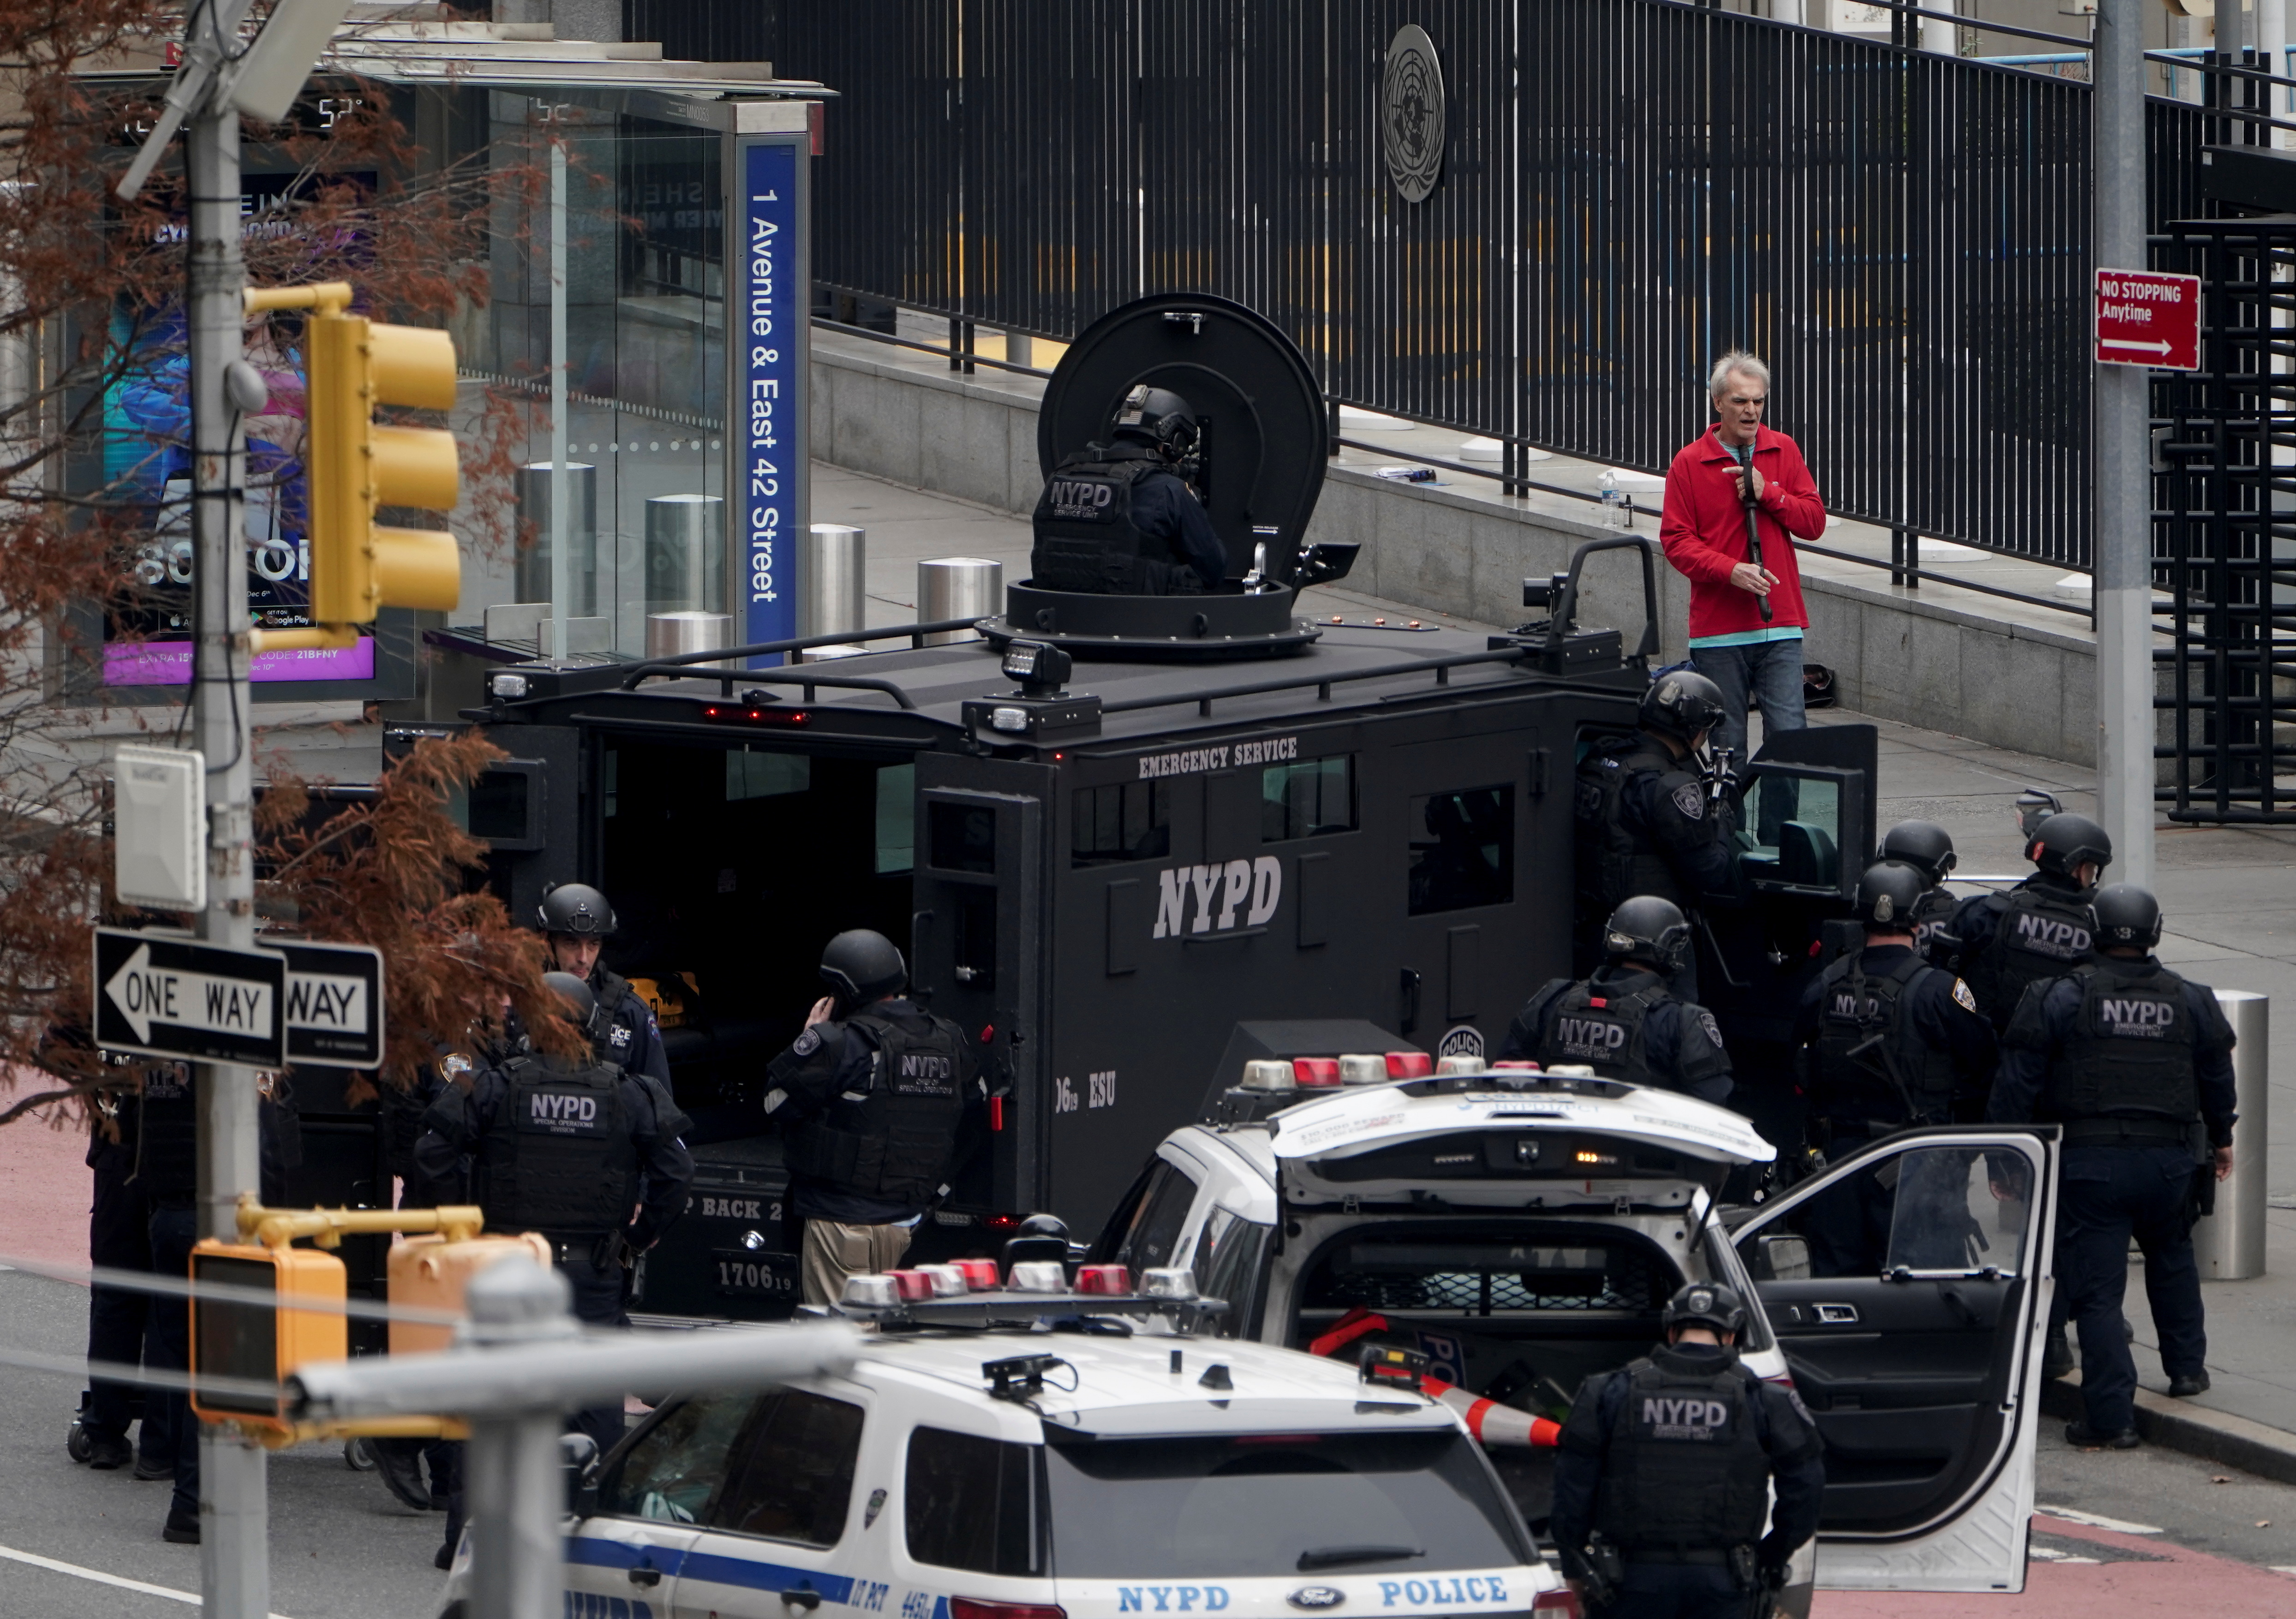 An armed man speaks with member of the NYPD outside the United Nations Headquarters in New York City